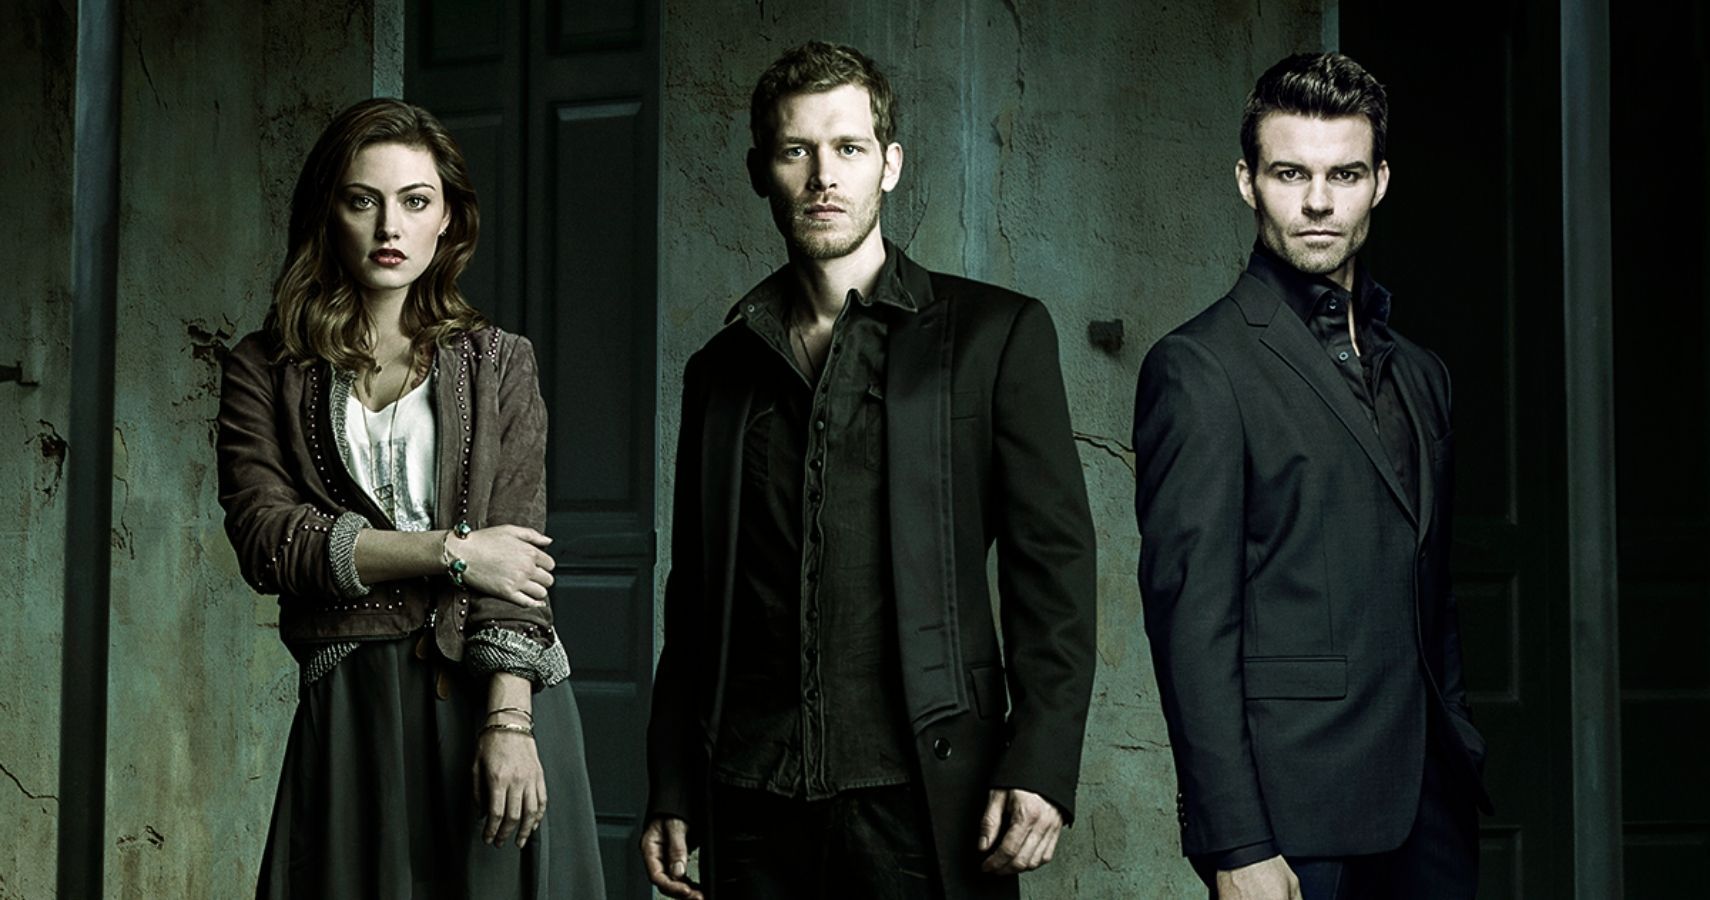 The Originals The 5 Best Villains (& The 5 Worst) Ranked